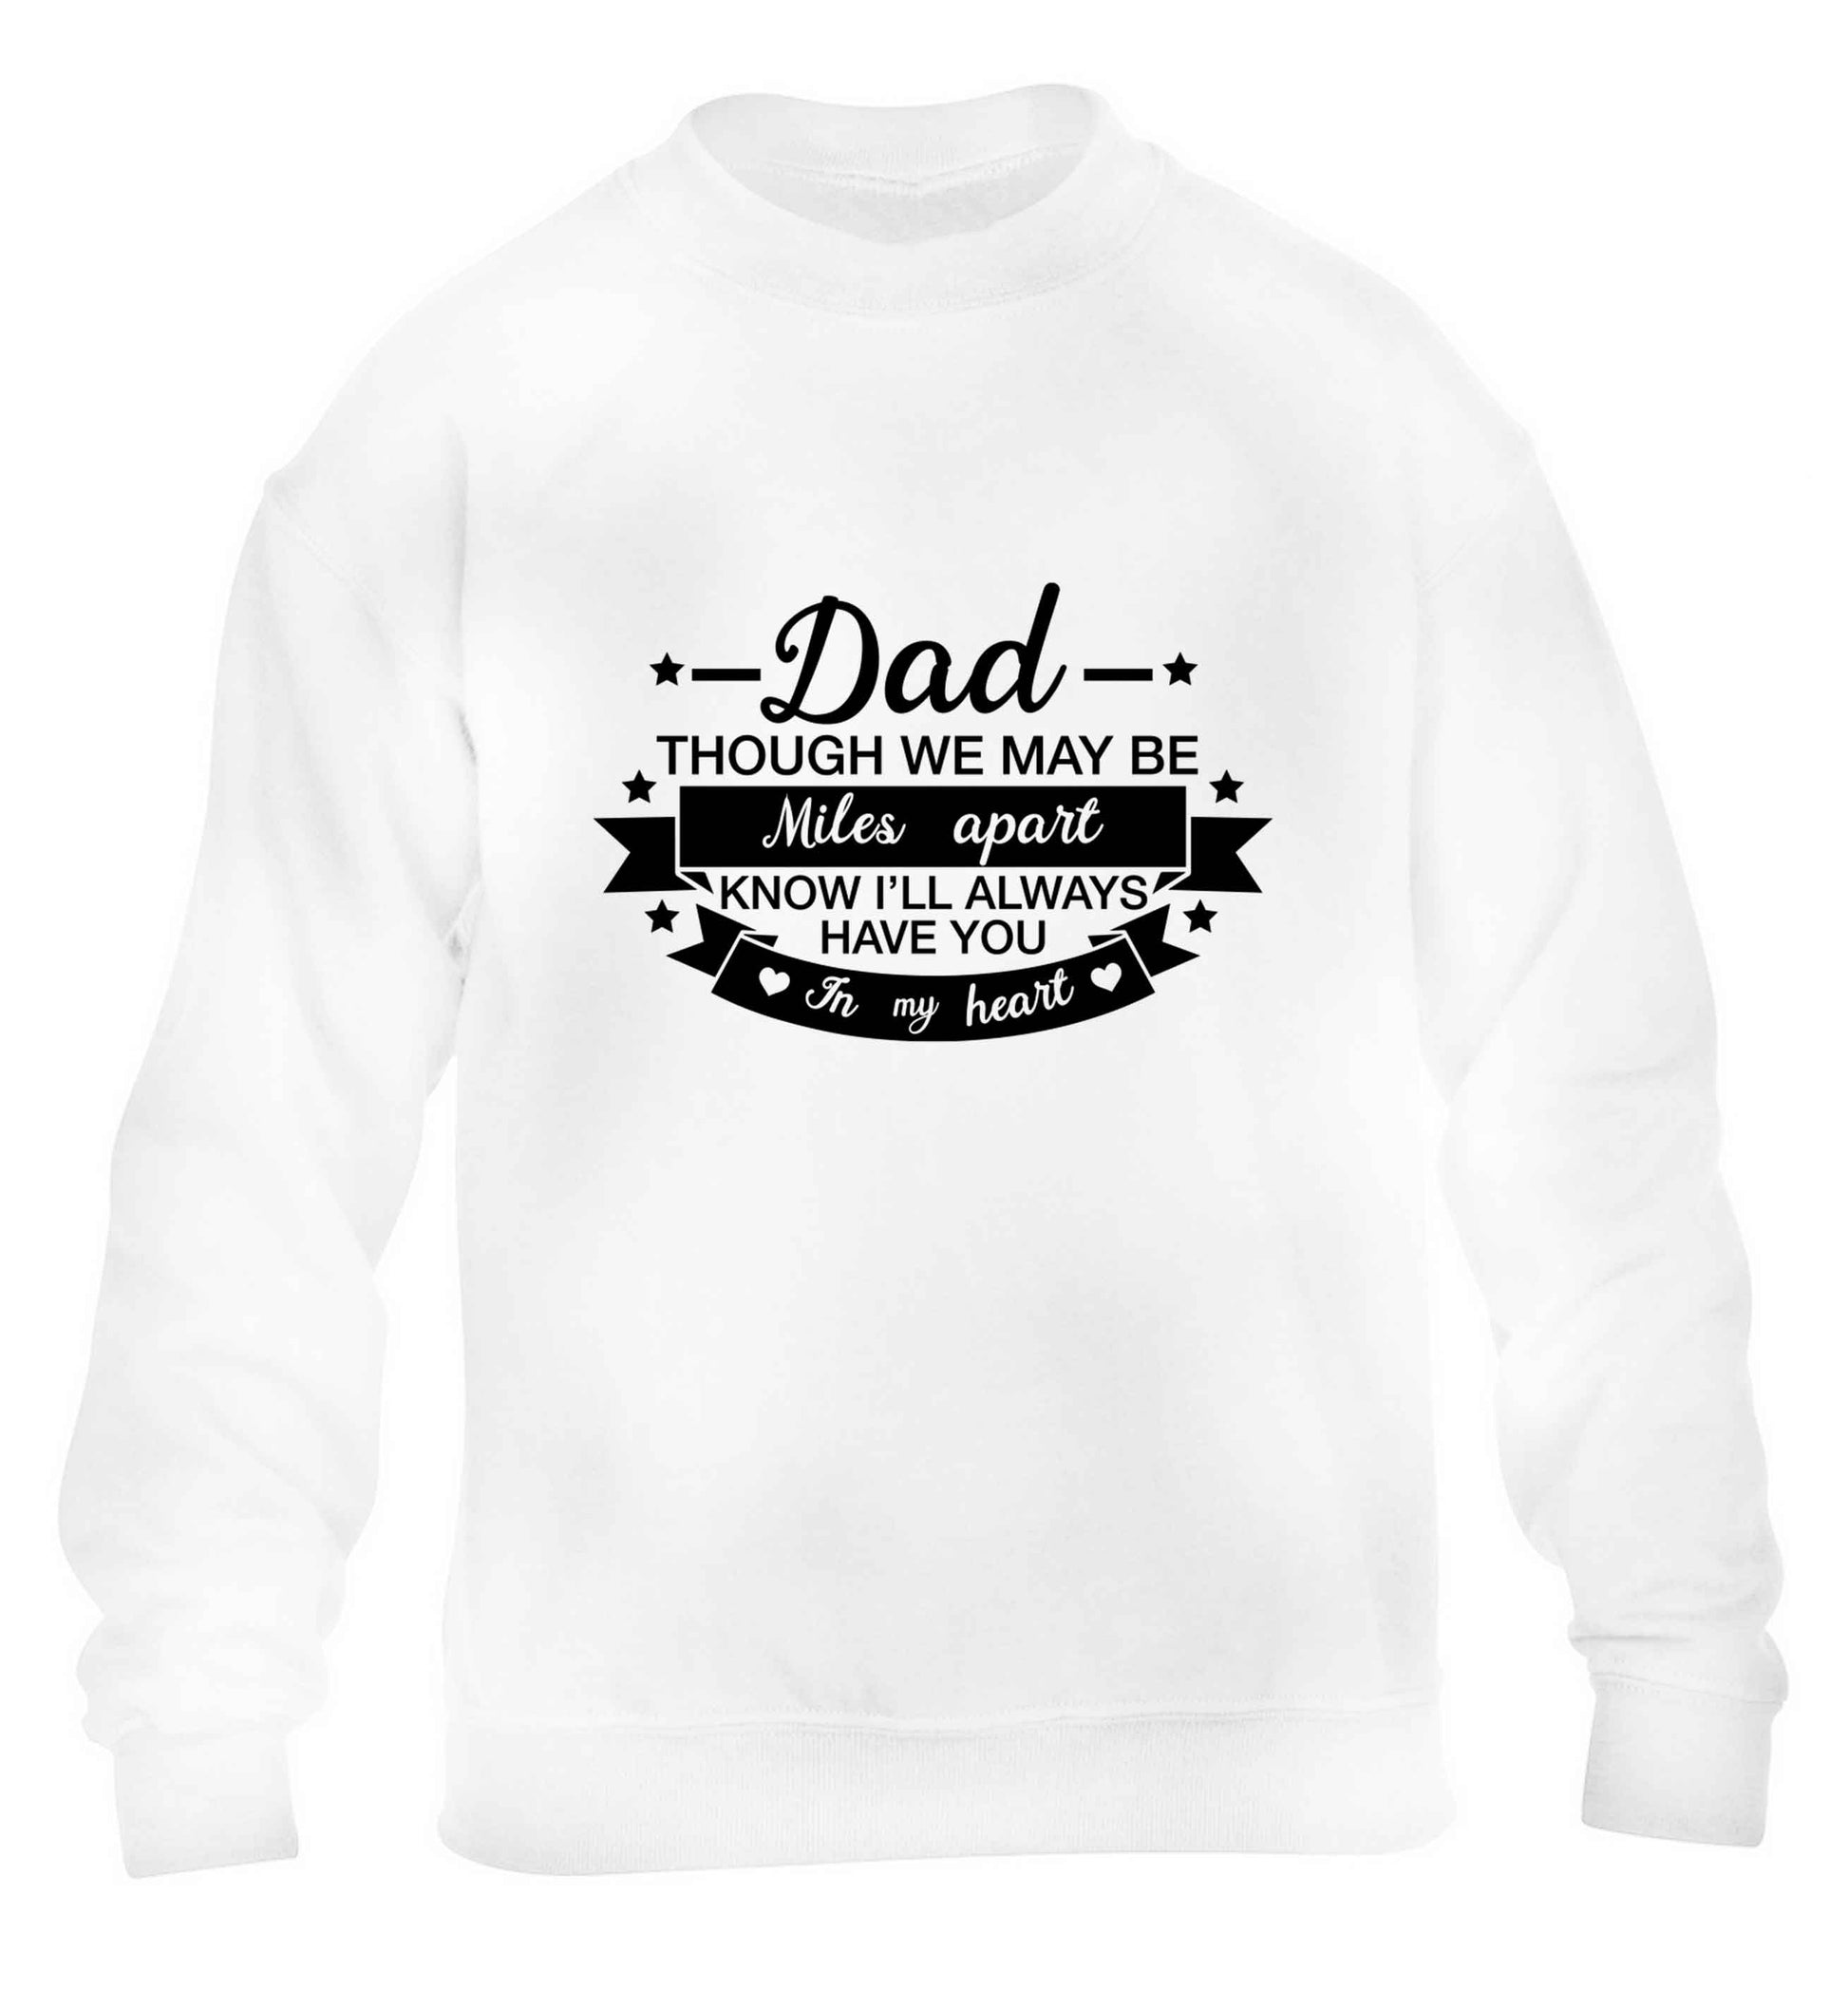 Dad though we are miles apart know I'll always have you in my heart children's white sweater 12-13 Years